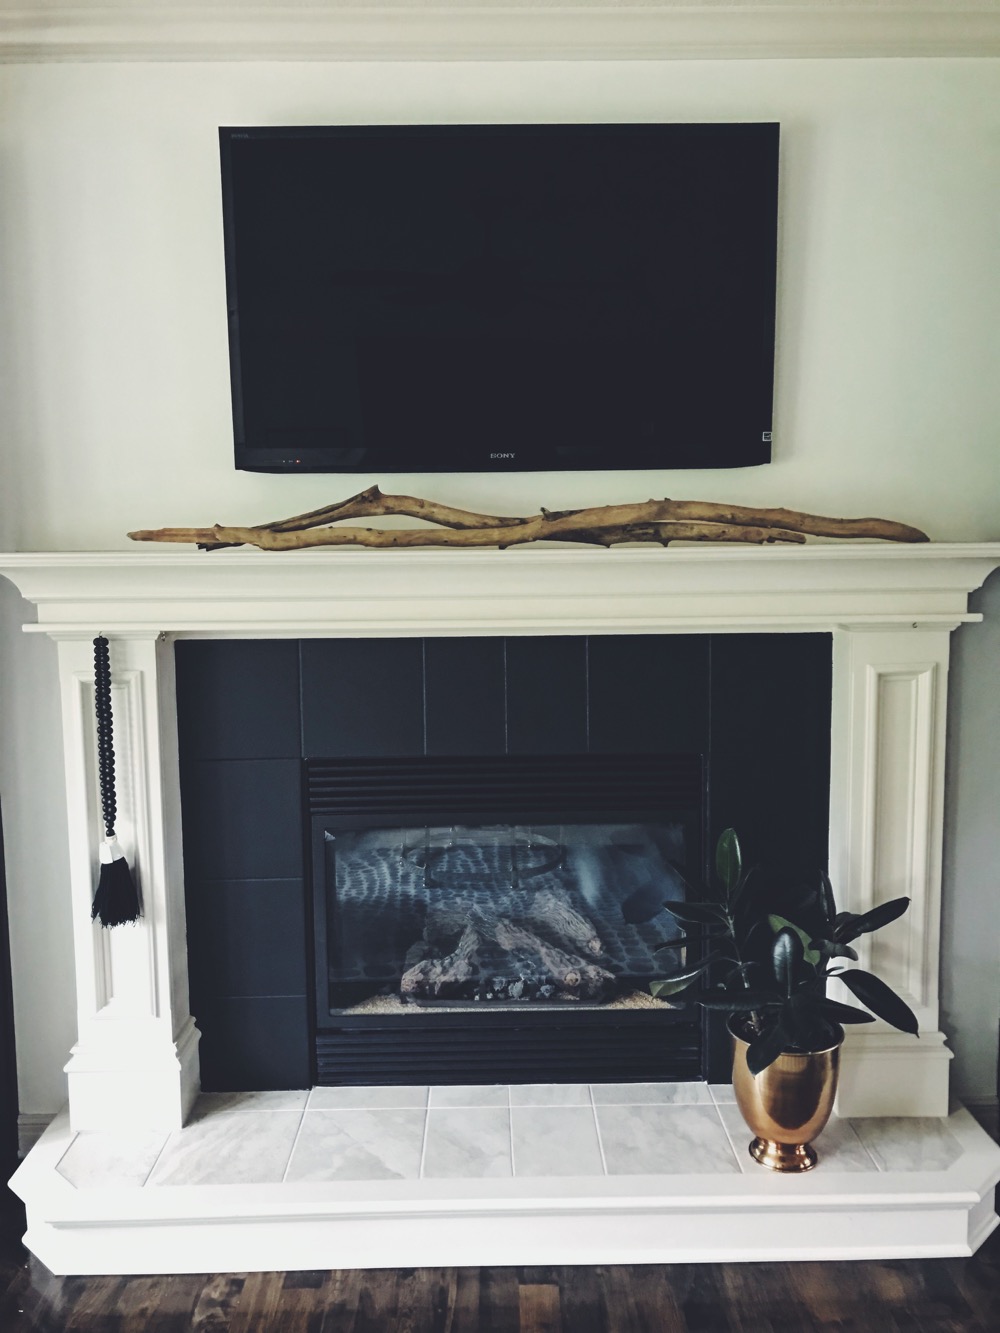 Painted Tile Around Fireplace Life, How To Tile Around Gas Fireplace